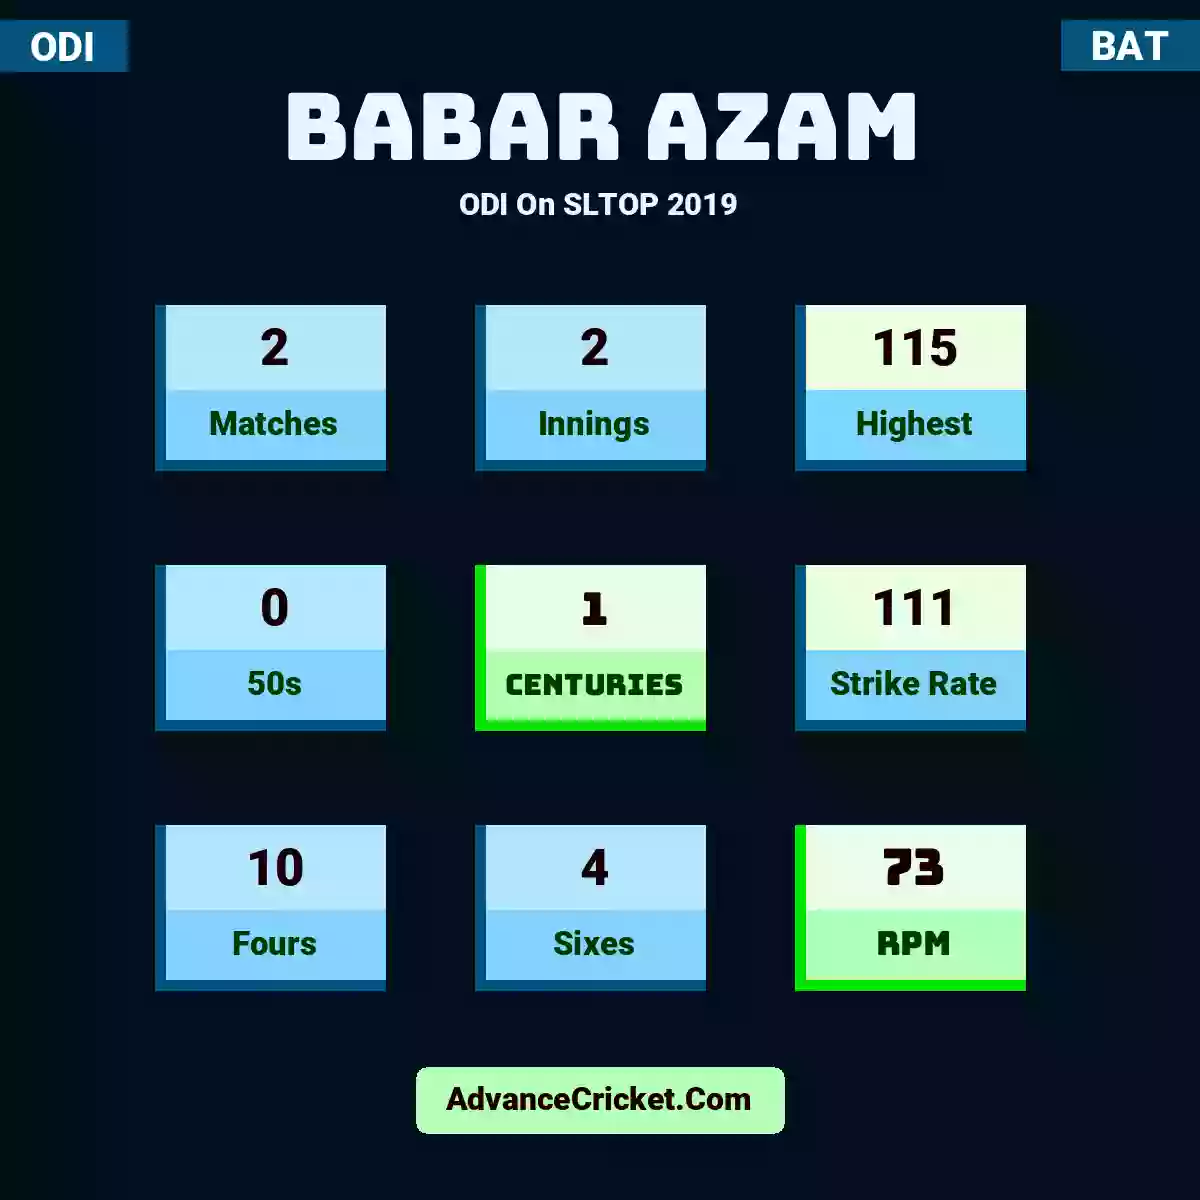 Babar Azam ODI  On SLTOP 2019, Babar Azam played 2 matches, scored 115 runs as highest, 0 half-centuries, and 1 centuries, with a strike rate of 111. B.Azam hit 10 fours and 4 sixes, with an RPM of 73.